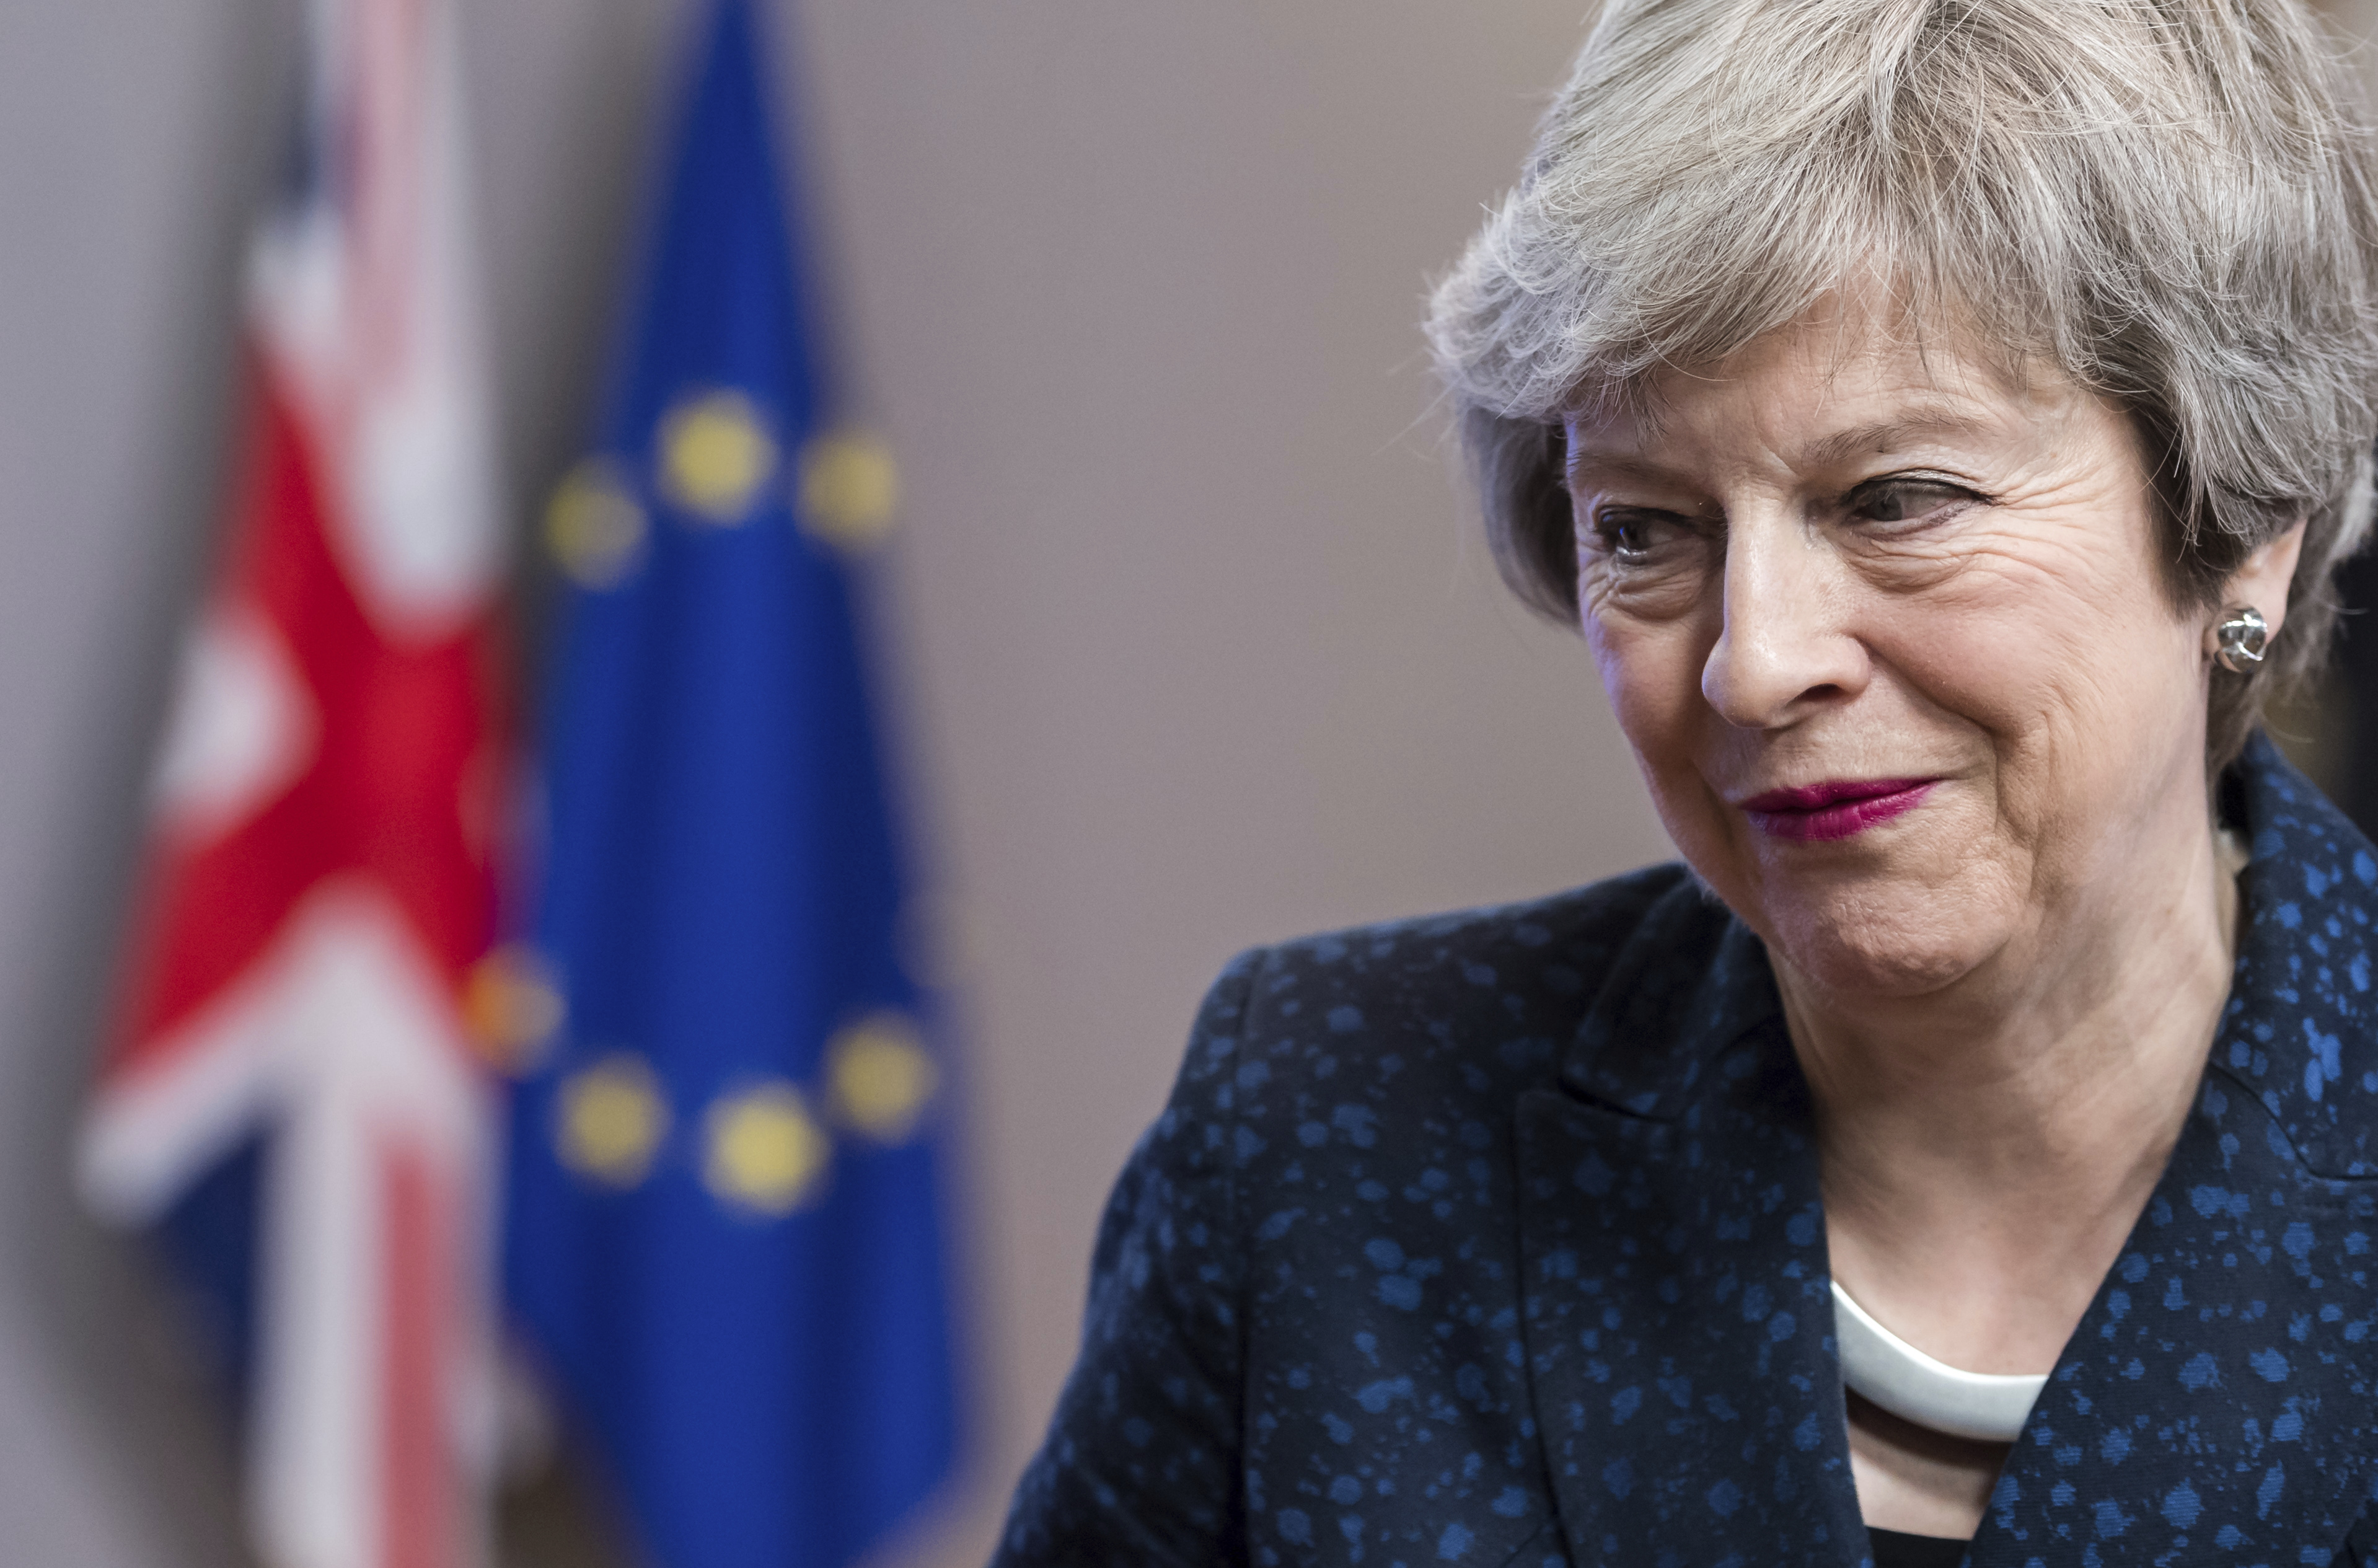 Britain's Prime Minister Theresa May leaves after a meeting with European Council President Donald Tusk at the European Council headquarters in Brussels, Thursday, Feb. 7, 2019. (Geert Vanden Wijngaert&mdash;AP)